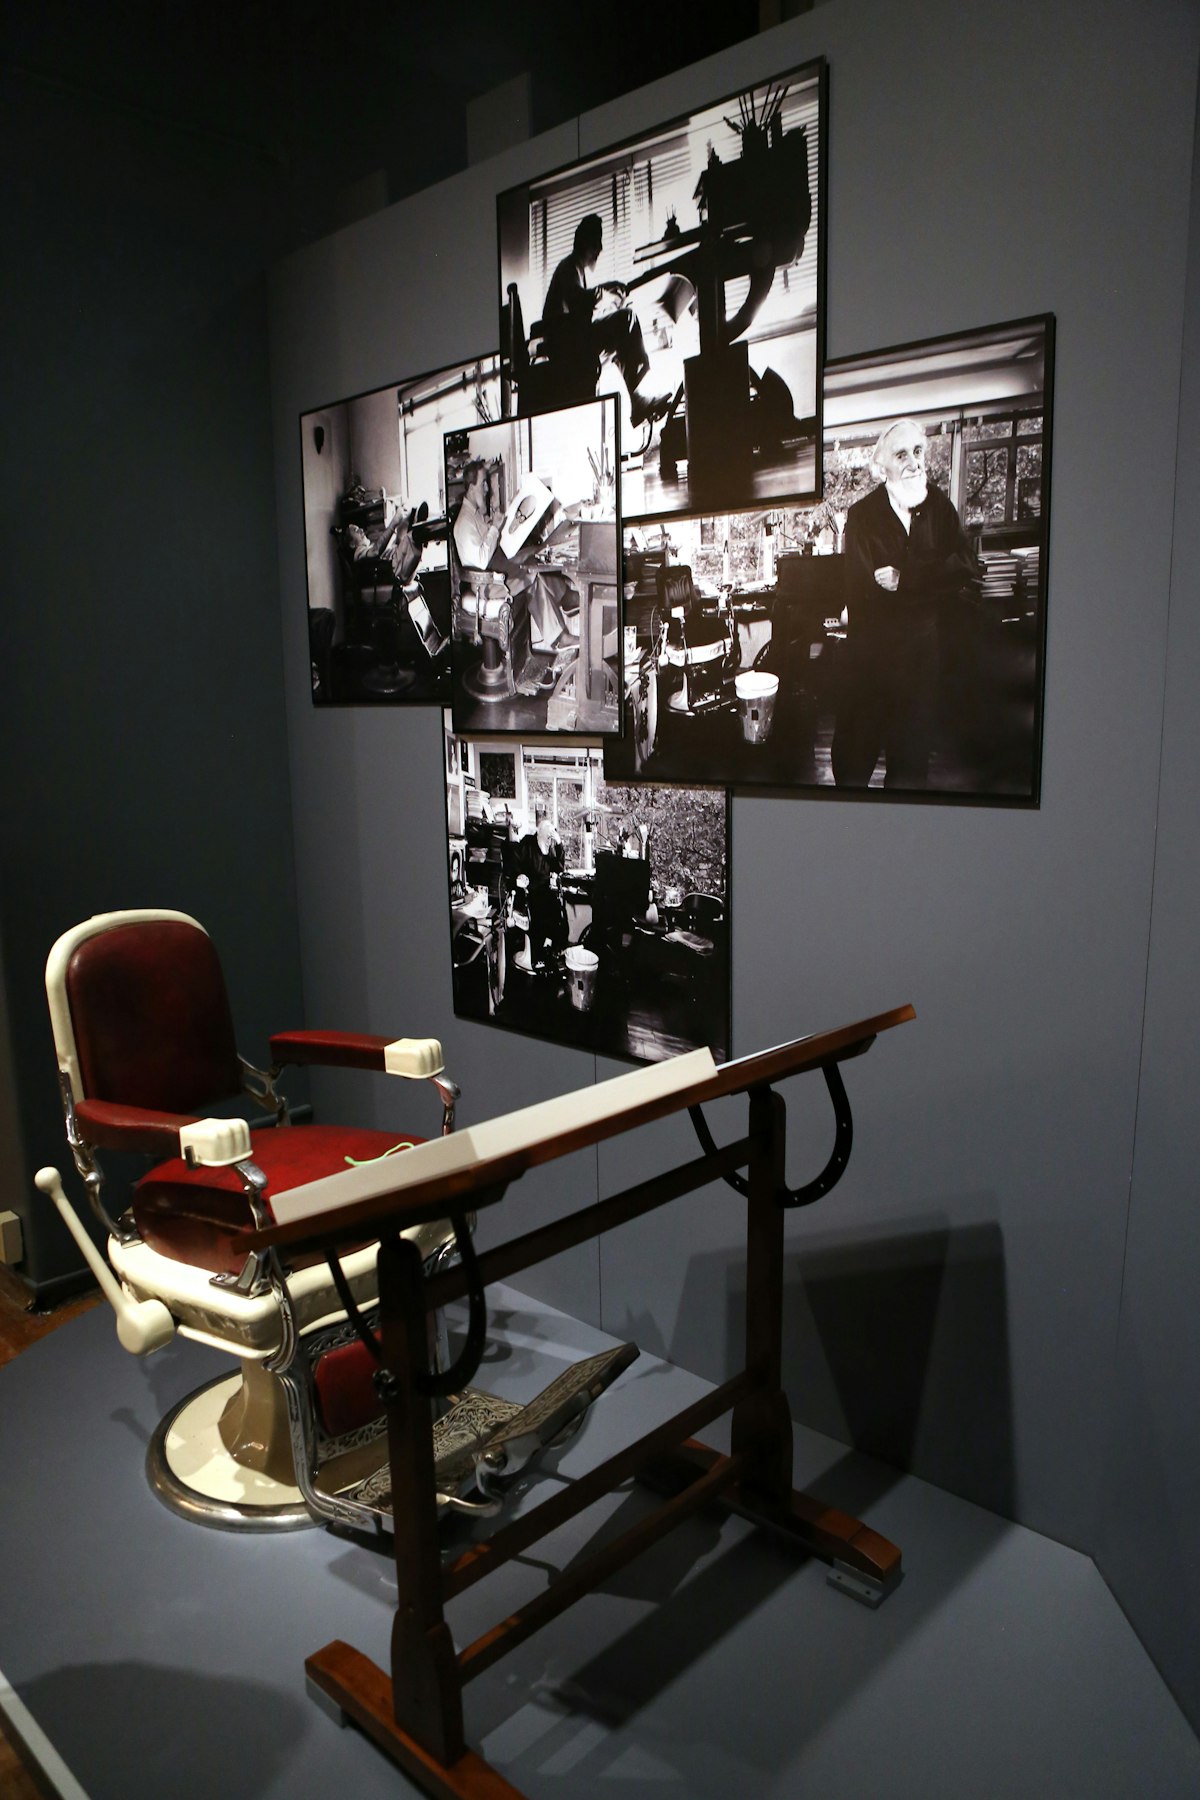 NEW YORK, NY - MAY 20:  The Barber Chair at 'The Hirschfeld Century: The Art of Al Hirschfeld' Exhibit at the New York Historical Society on May 20, 2015 in New York City.  (Photo by Walter McBride/WireImage)